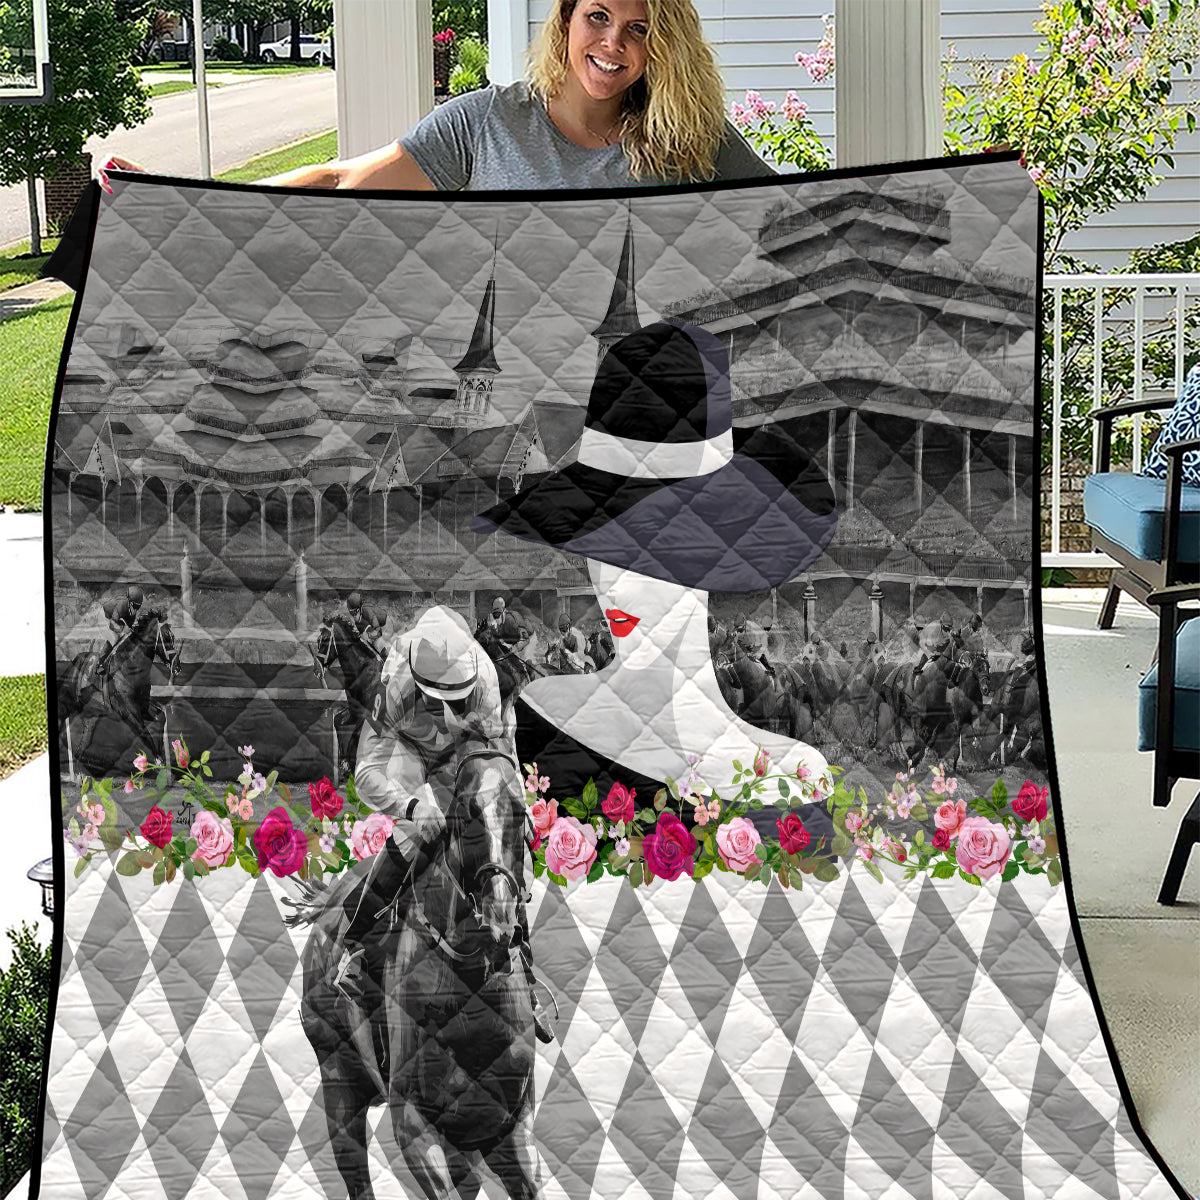 Kentucky Racing Horses Derby Hat Lady Quilt Churchill Downs and Roses Grayscale